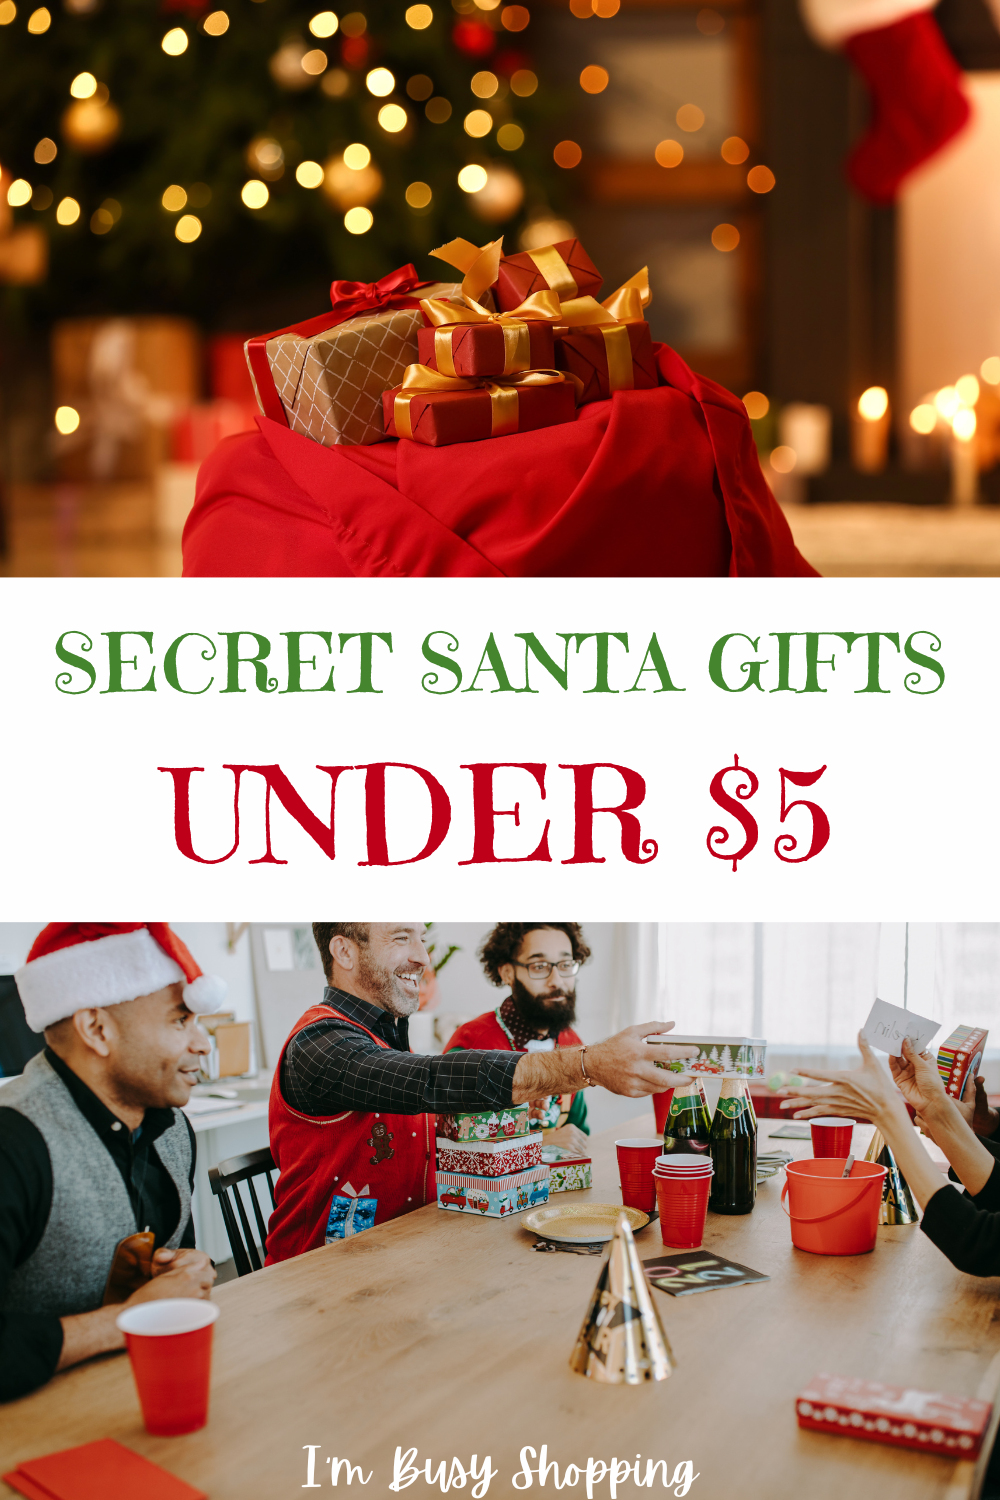 Pin image with title "Secret Santa Gifts Under $5" showing pictures of Santa's gift sack and officemates exchanging gifts 